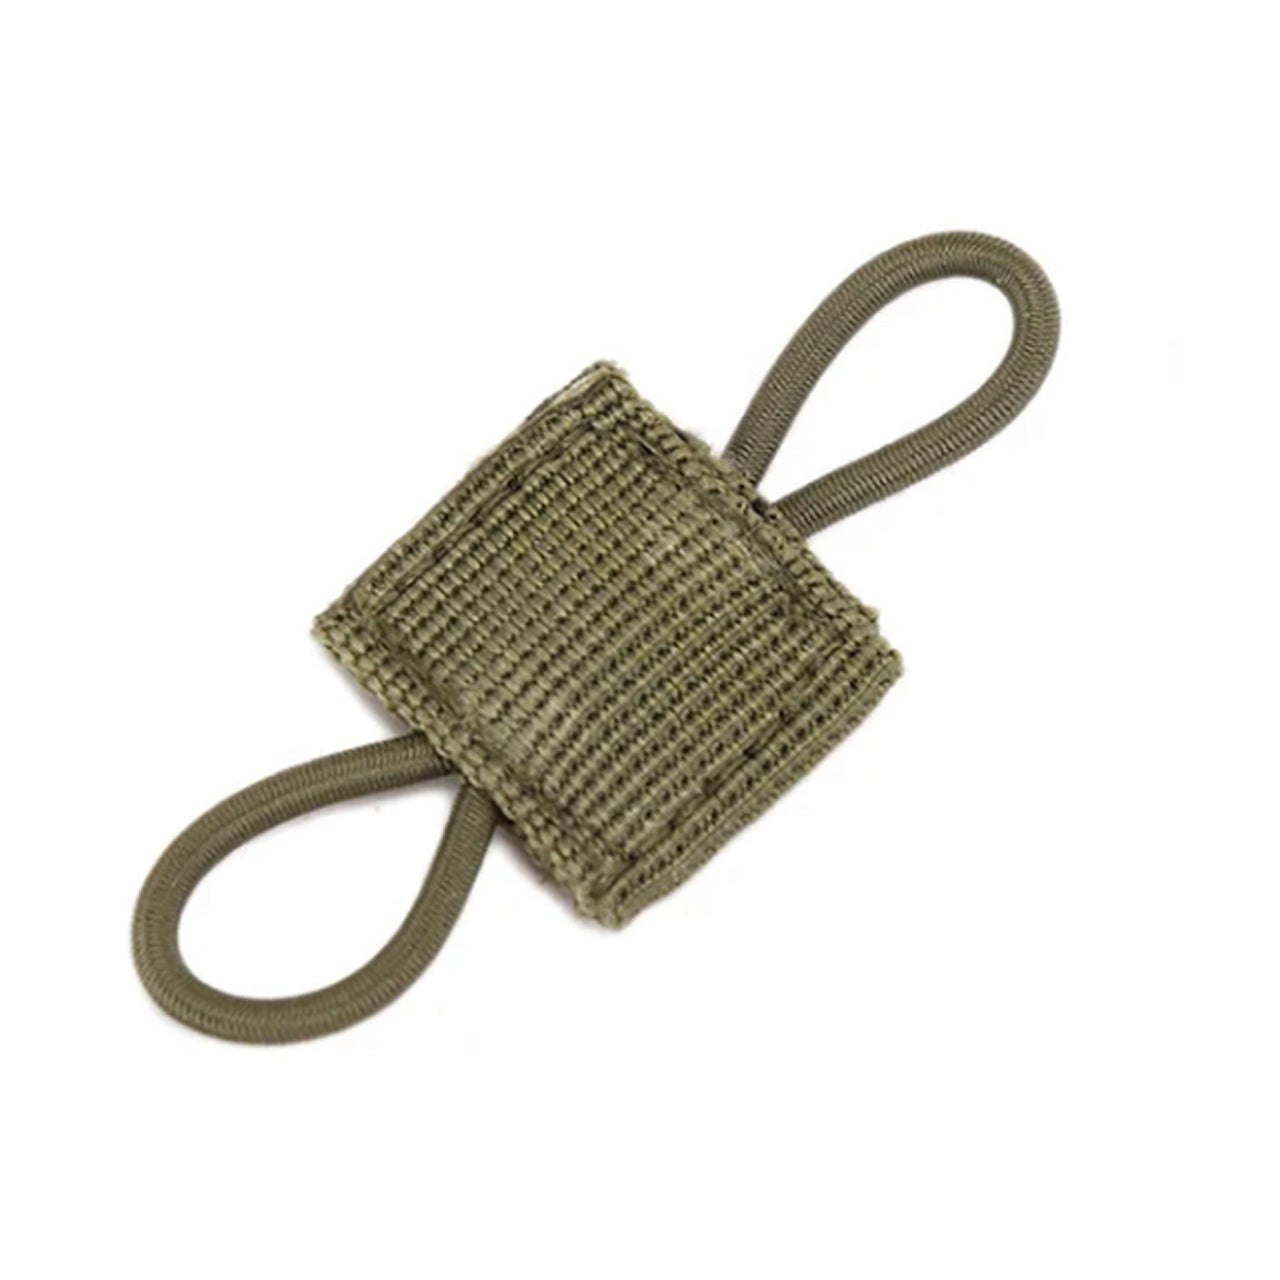 High quality MOLLE webbing fastners are great for attaching equipment such as torches and cylume sticks. Also great for securing camelbak tubes to webbing and other styles of equipment. Colours: Khaki OD Green Black www.defenceqstore.com.au